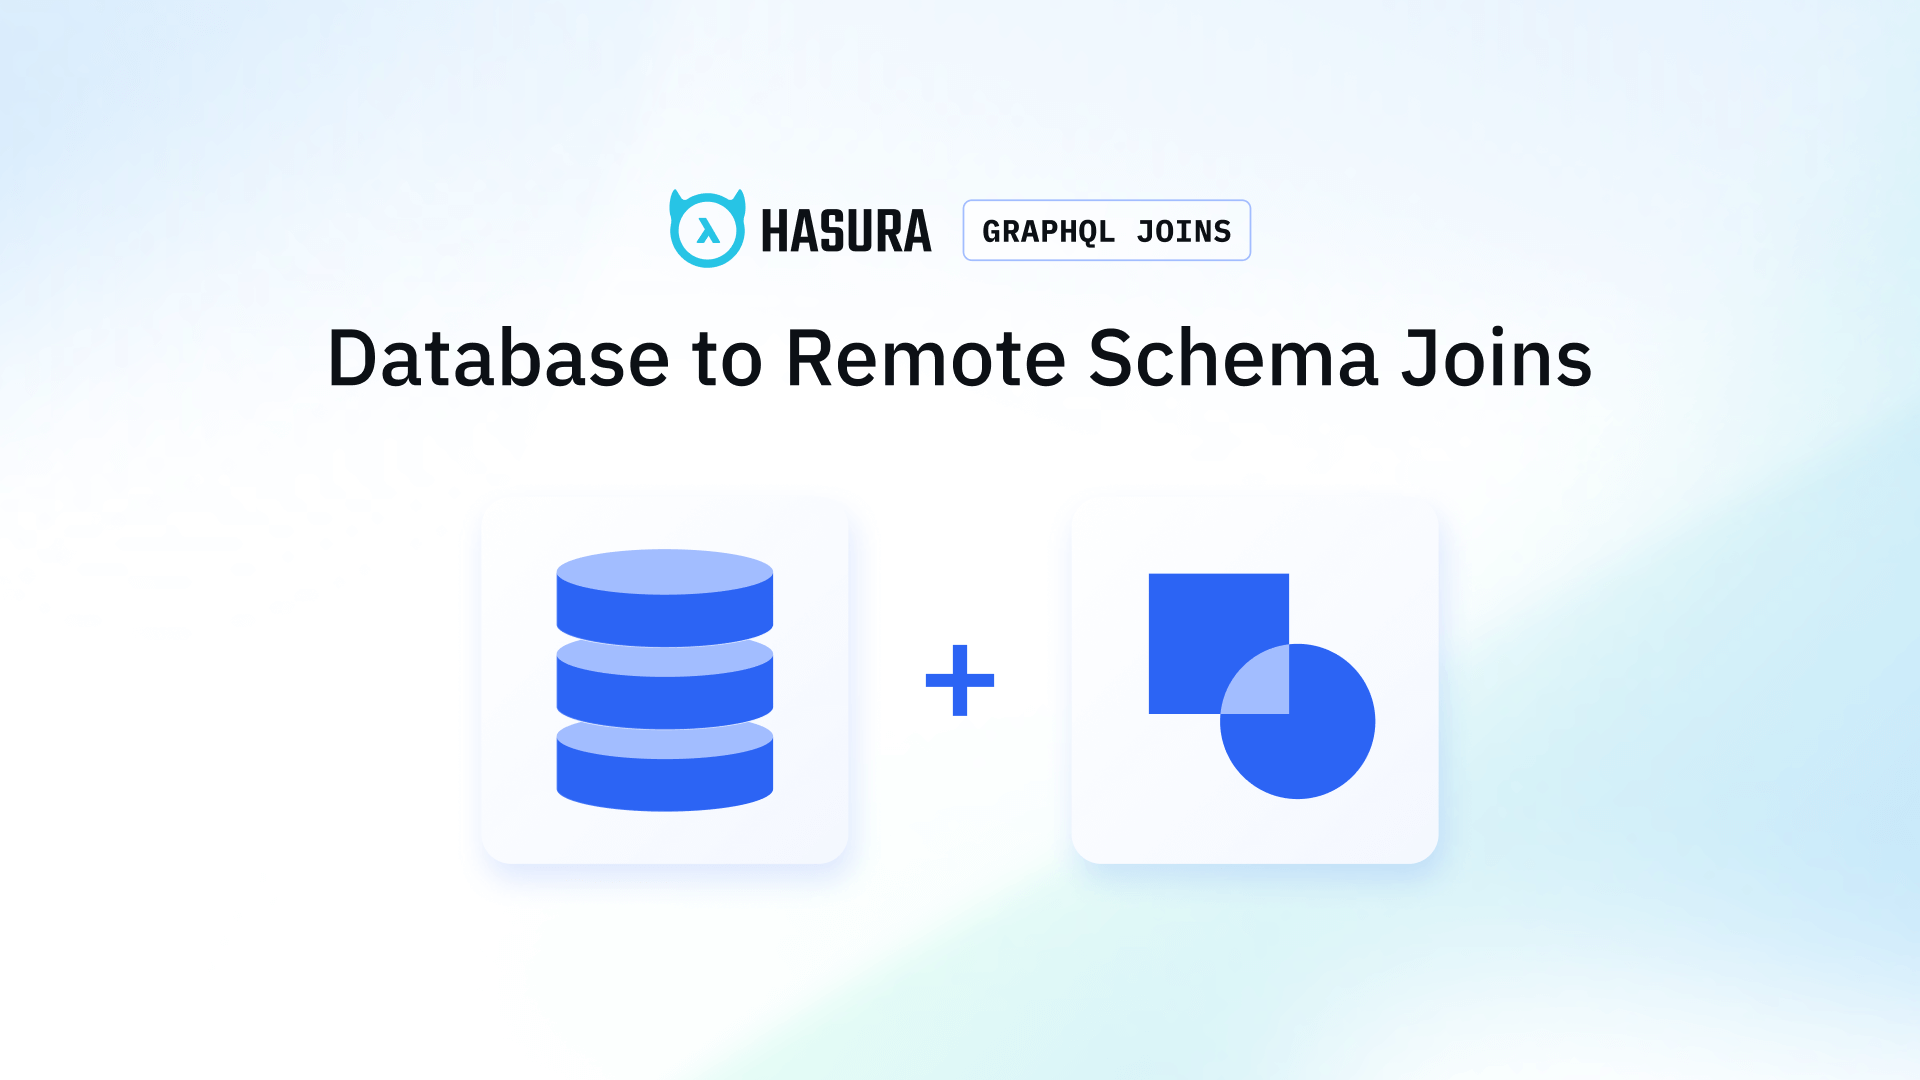 Join data from a Database with GraphQL API using Database to Remote Schema Joins